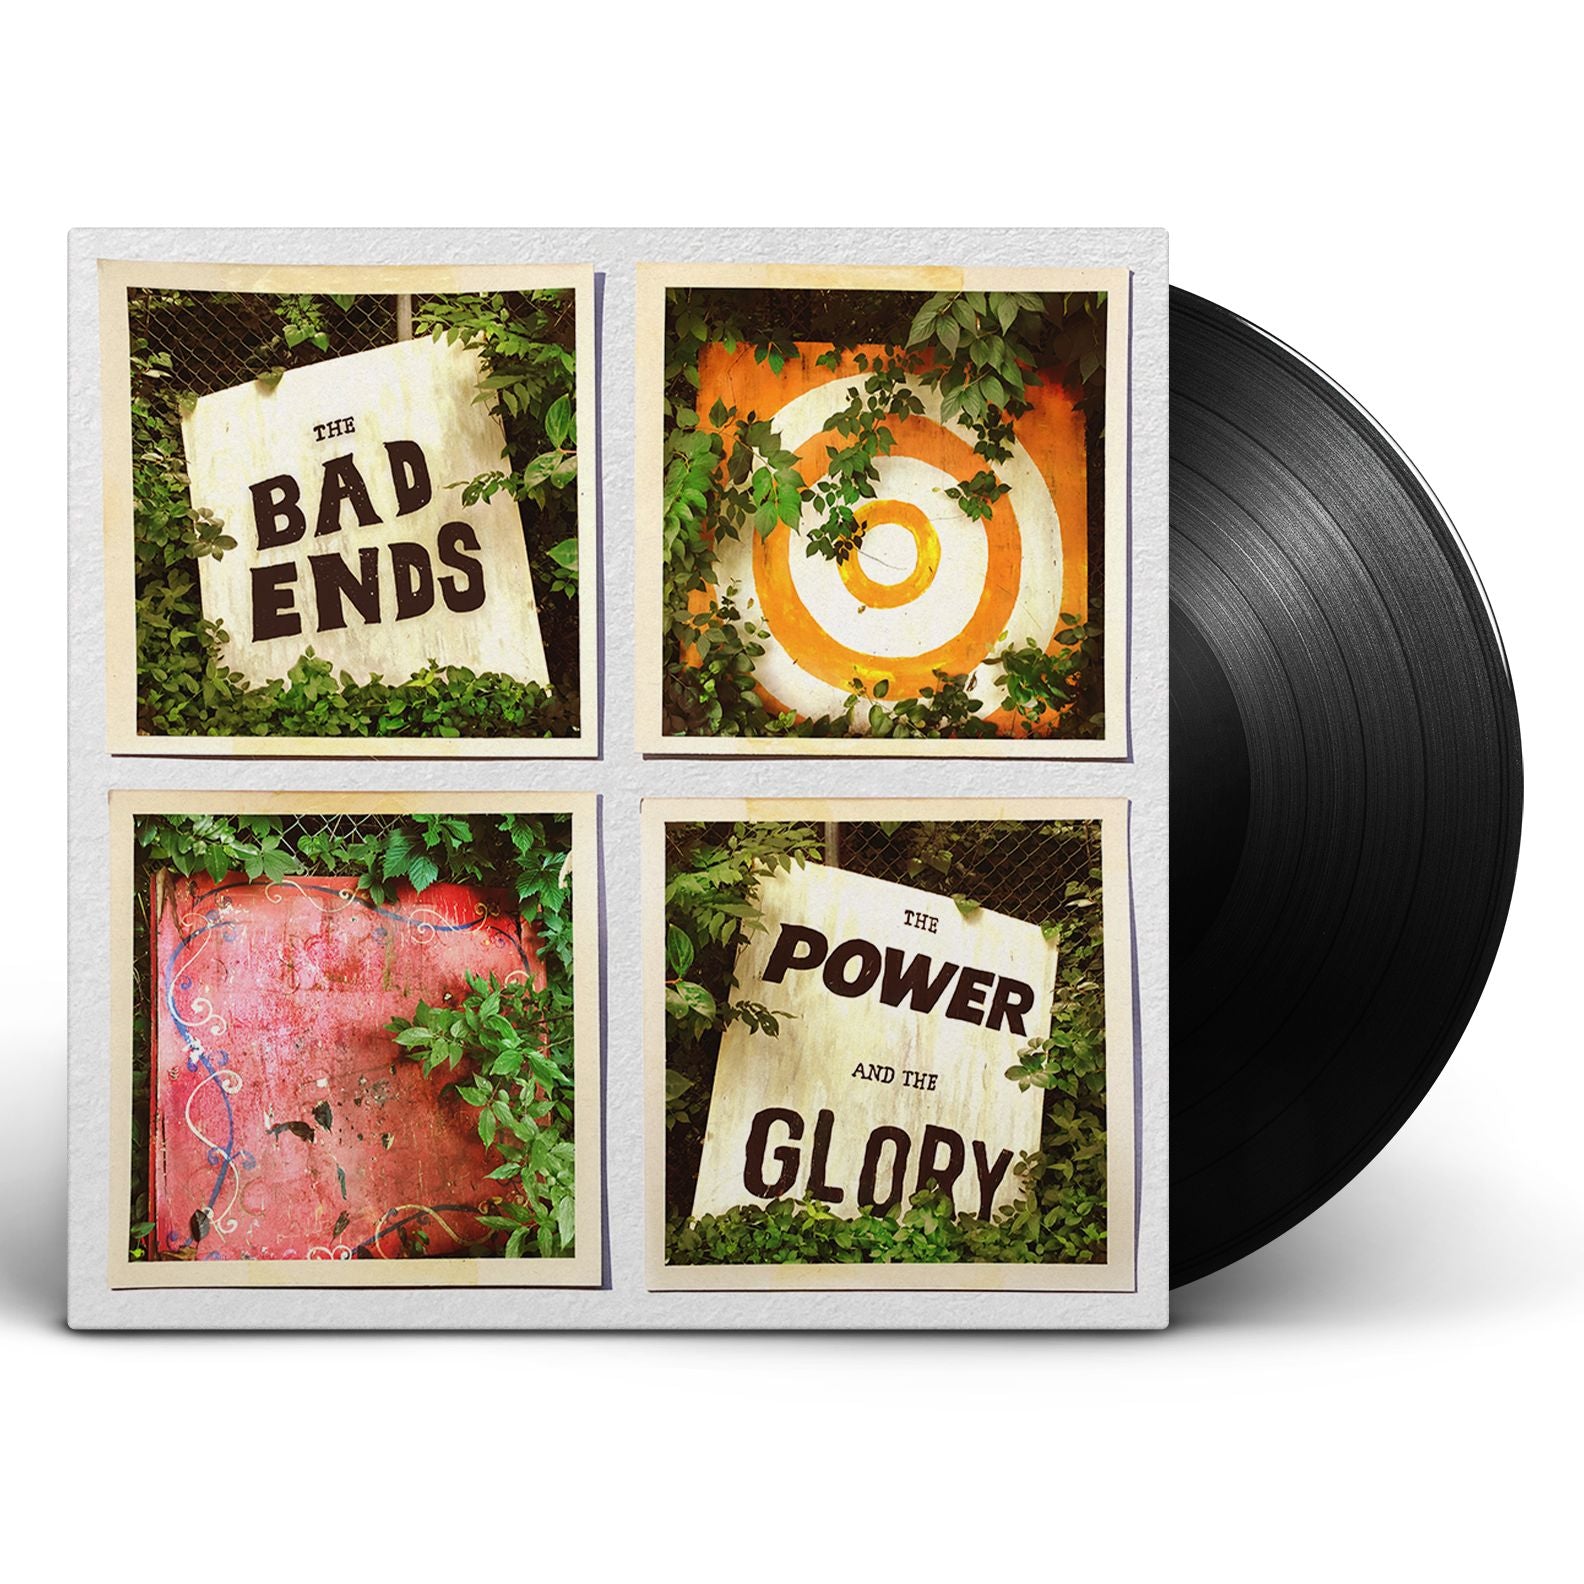 The Bad Ends - The Power And The Glory [Vinyl]